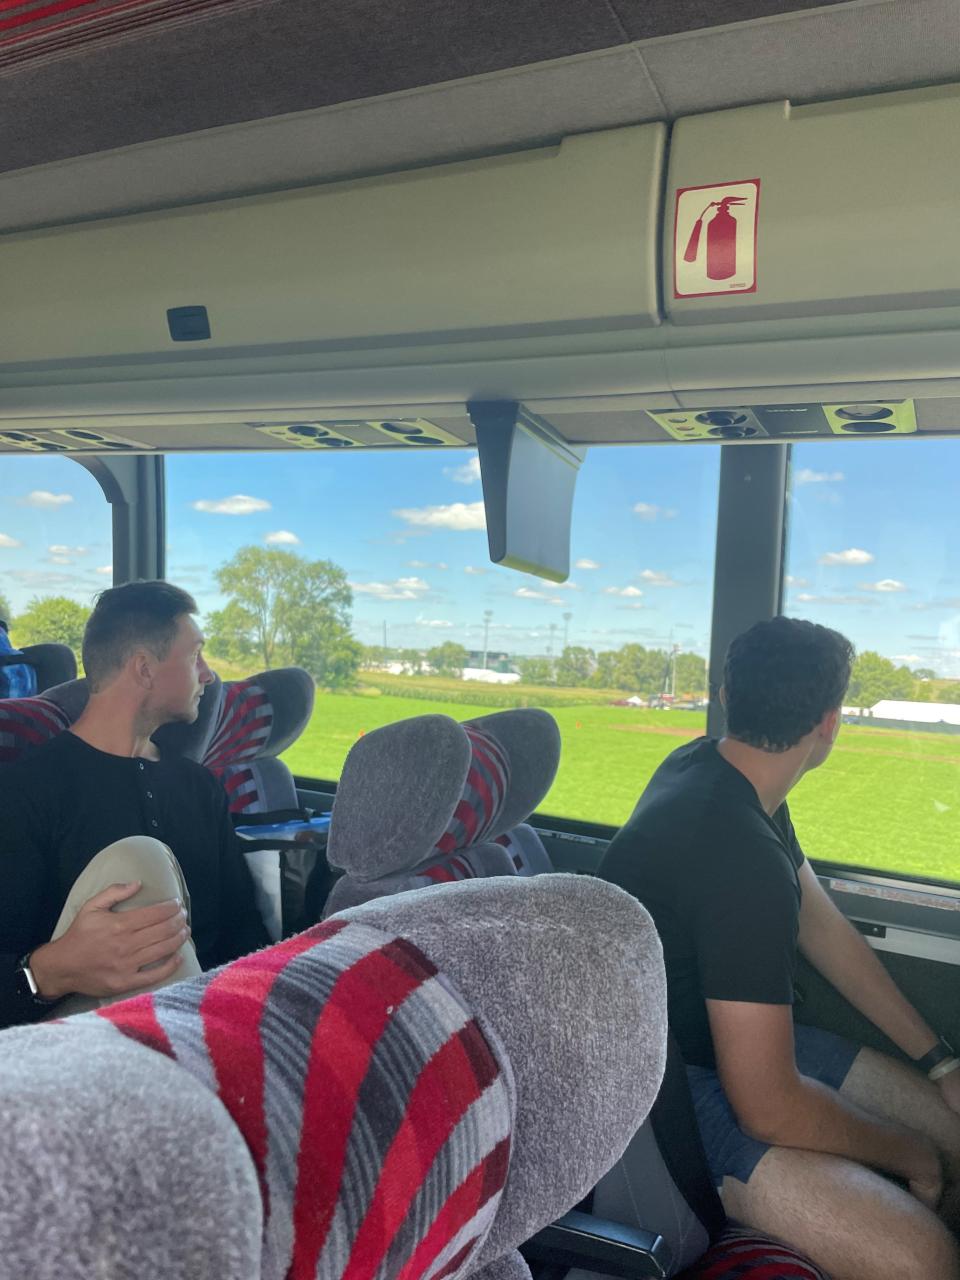 Cedar Rapids Kernels pitcher Aaron Rozek and John Stankiewicz watch as the team bus pulls up to the "Field of Dreams" movie site.